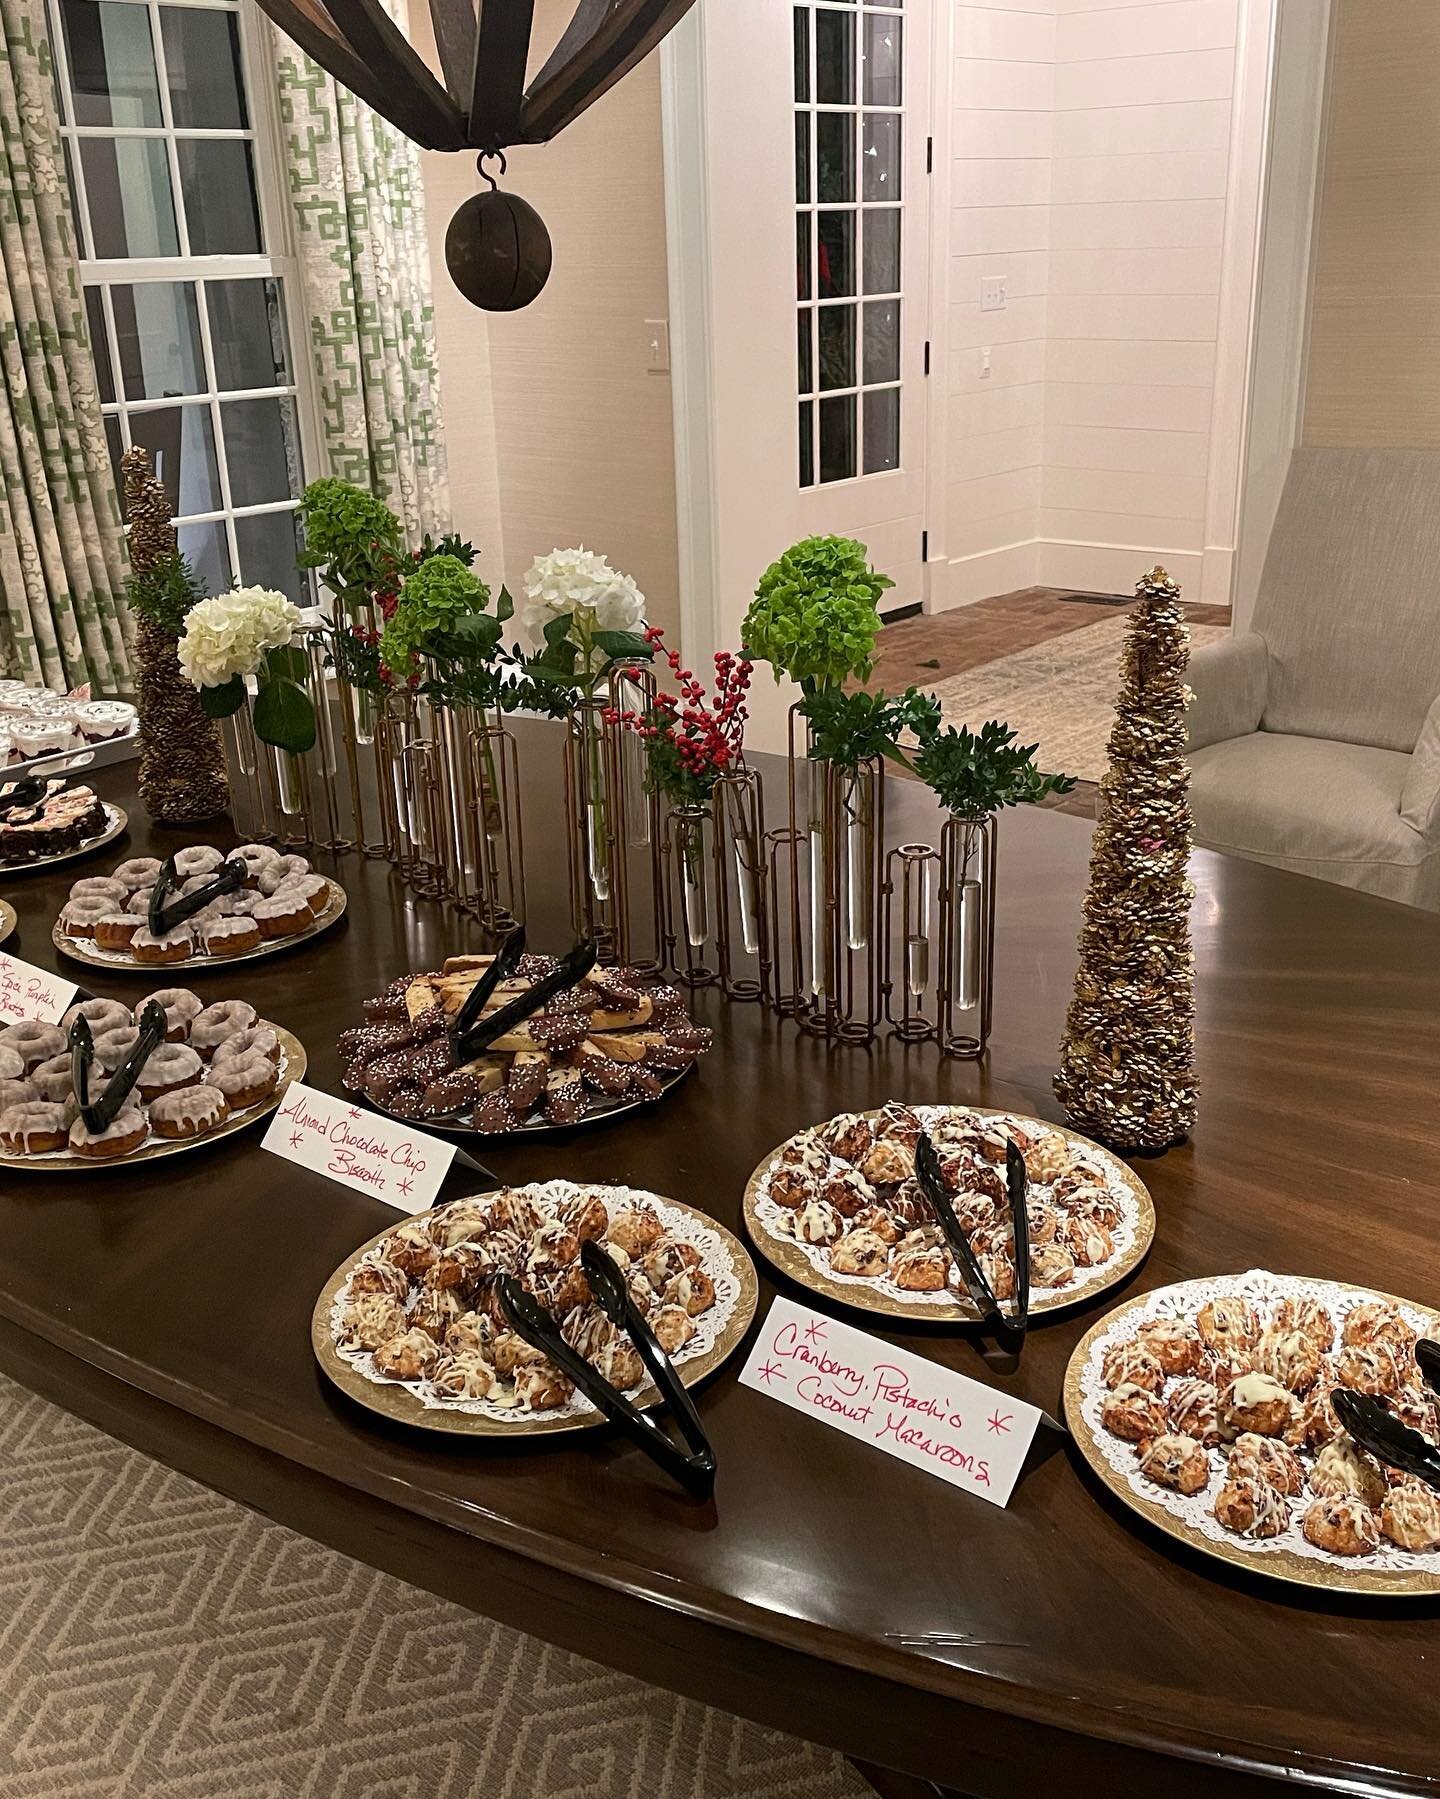 A little look into a Holiday dessert cocktail hour from last week! We included mini pumpkin Bundt cakes, cranberry pistachio macaroons, chocolate chip biscotti, and peppermint bark brownies.